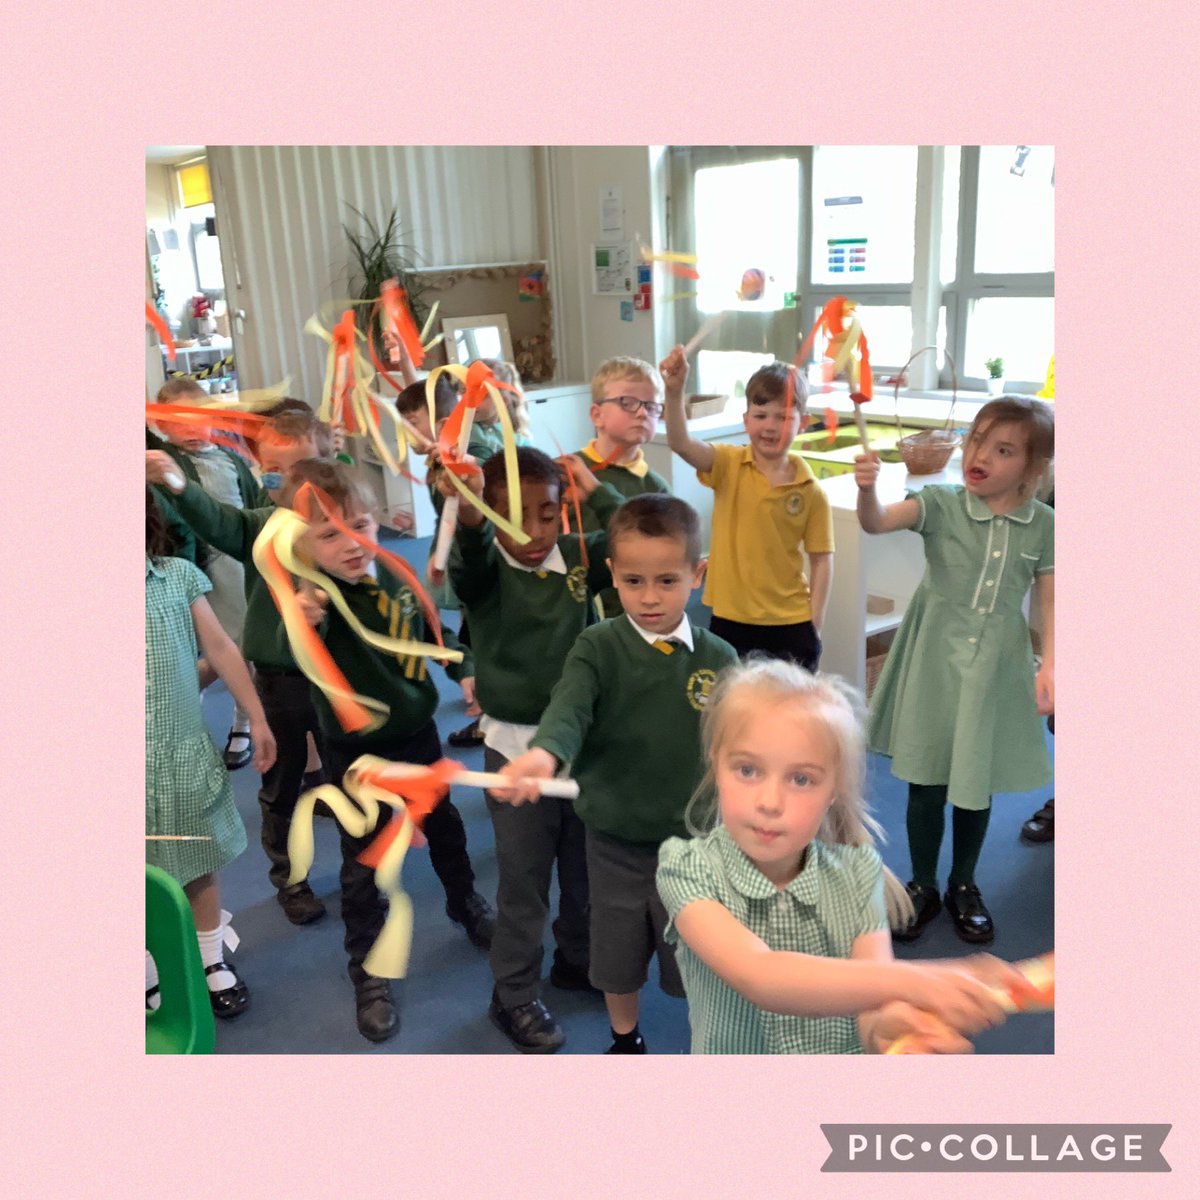 Blwyddyn Un have been talking about the story of Pentecost and they made Holy Spirit flames. #dosbarthun #re #expressivearts